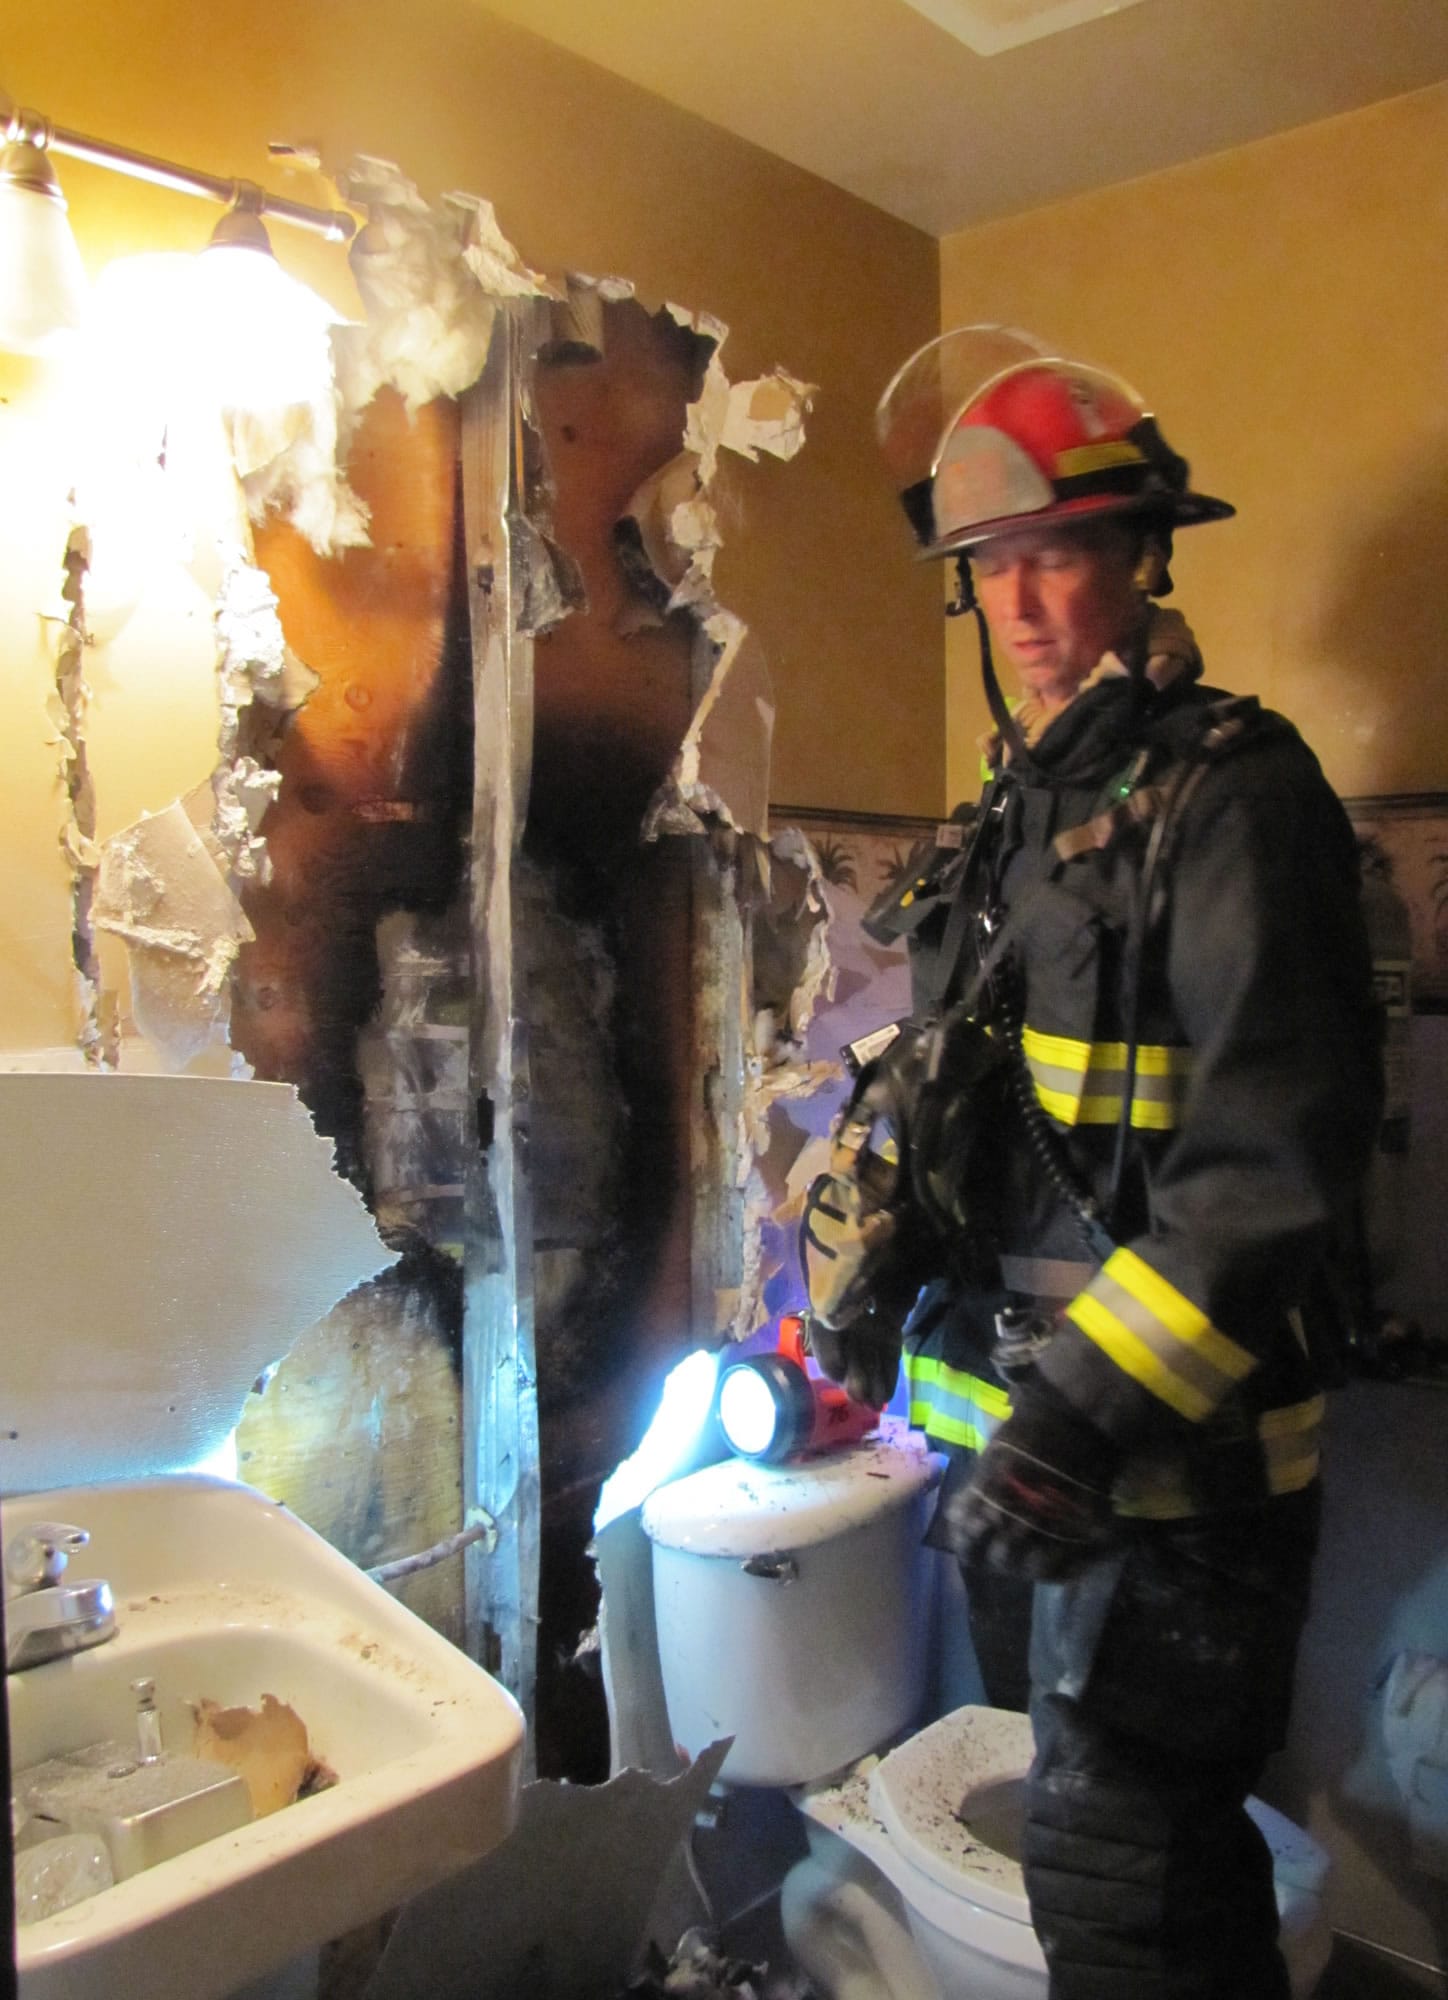 A firefighter inspects damage to a restroom after an electrical fire at Tommy O's Thursday afternoon.